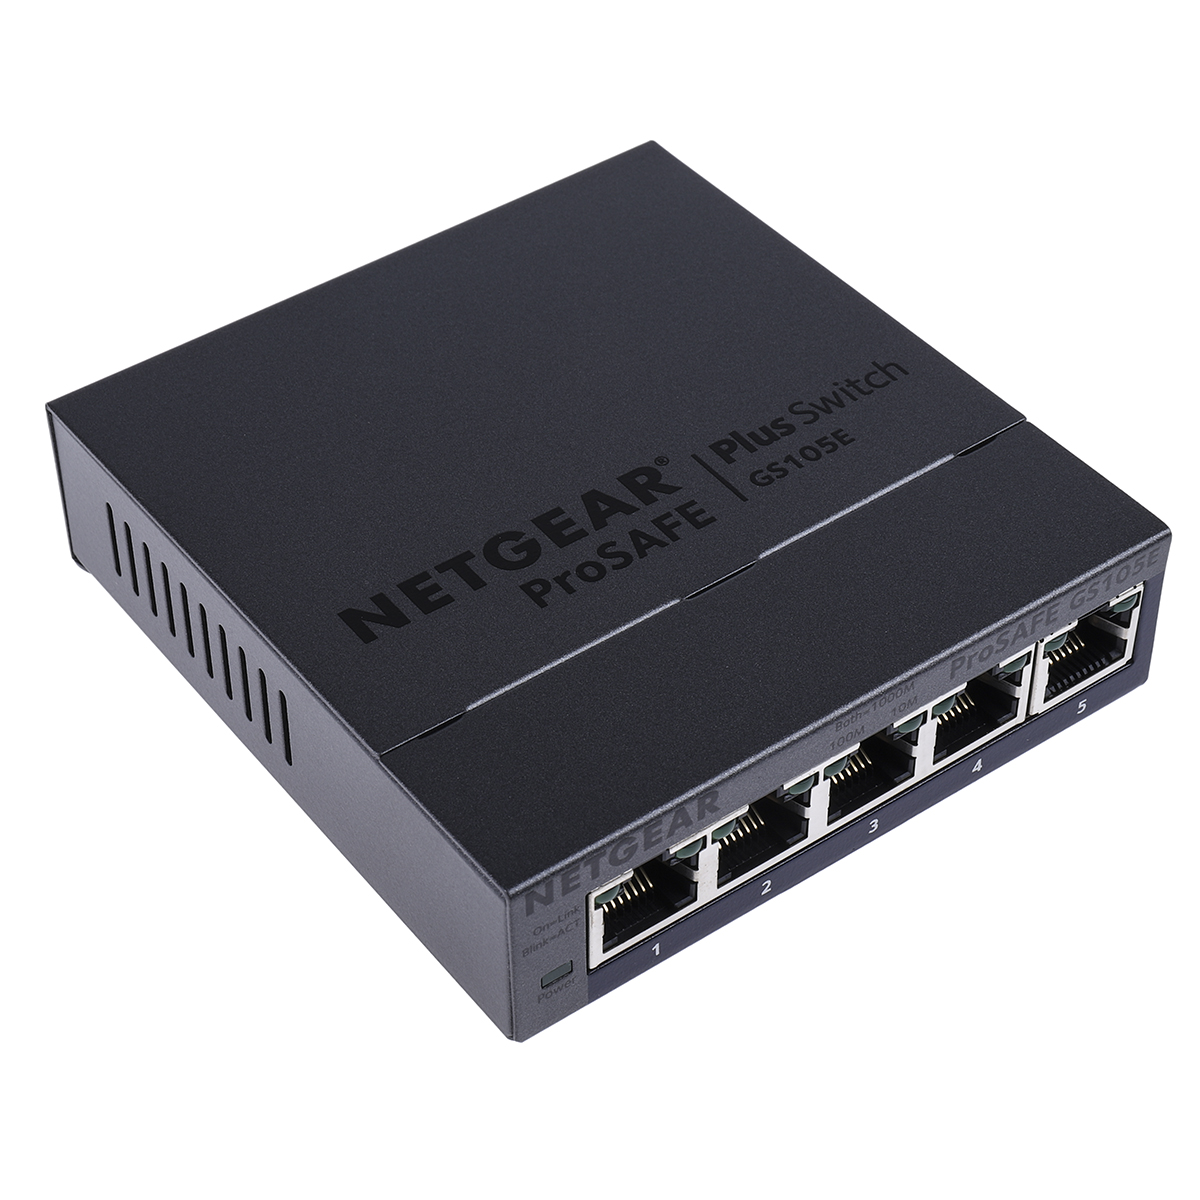 Discover the best 16 ports Ethernet Switch switches: Gigabit, Managed &  More - Top Picks!